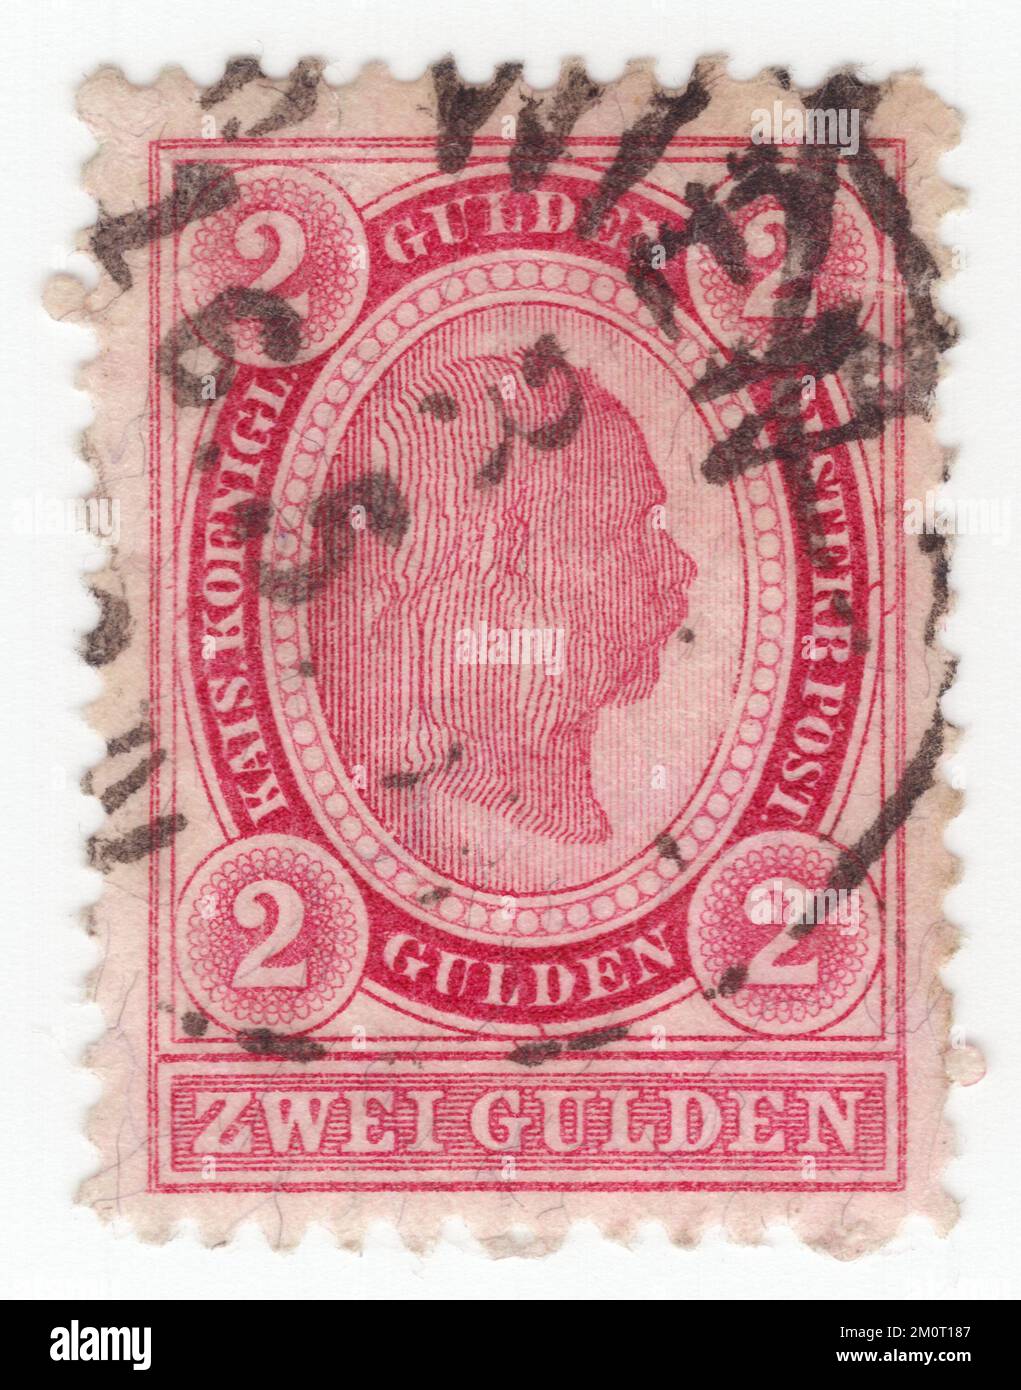 AUSTRIA — 1890: An 2 gulden carmine postage stamp depicting Embossed portrait of young Austrian Monarch Emperor Franz Josef. Franz Joseph I or Francis Joseph I was Emperor of Austria, King of Hungary, and the other states of the Habsburg monarchy from 2 December 1848 until his death on 21 November 1916. In the early part of his reign, his realms and territories were referred to as the Austrian Empire, but were reconstituted as the dual monarchy of the Austro-Hungarian Empire in 1867. From 1 May 1850 to 24 August 1866, Franz Joseph was also President of the German Confederation Stock Photo